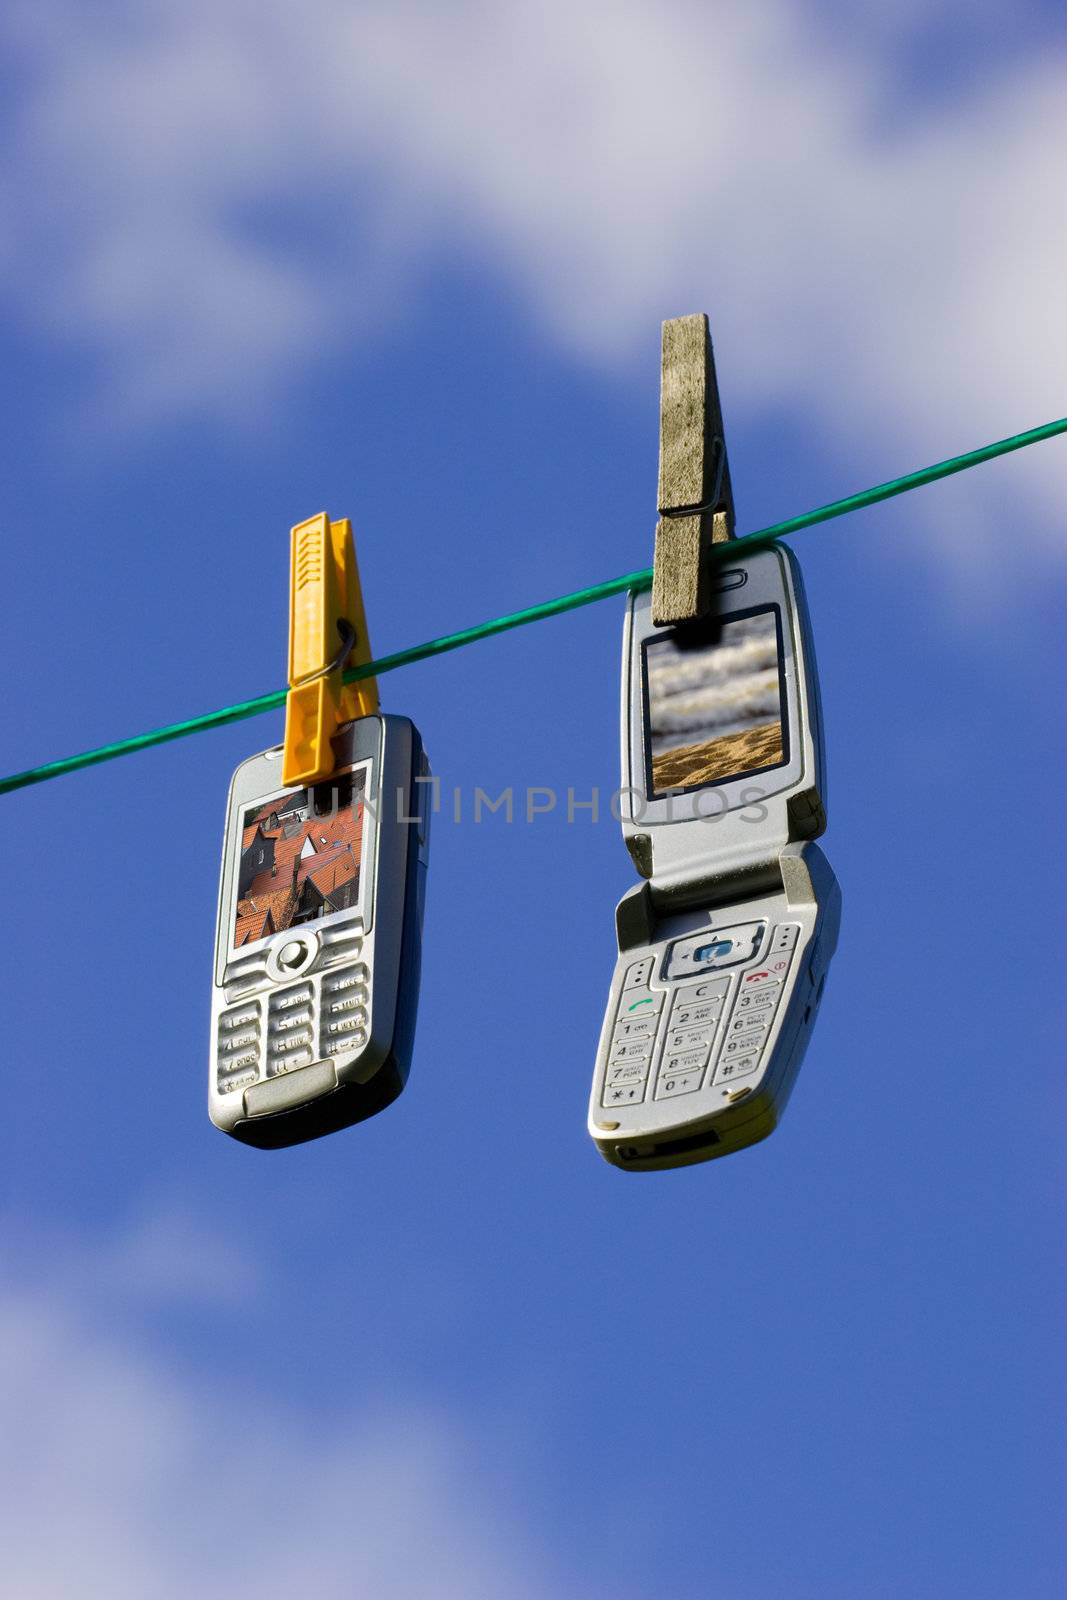 Two Cell Phones Drying on Clothesline / Network of wireless devices. Clipping path for displays included